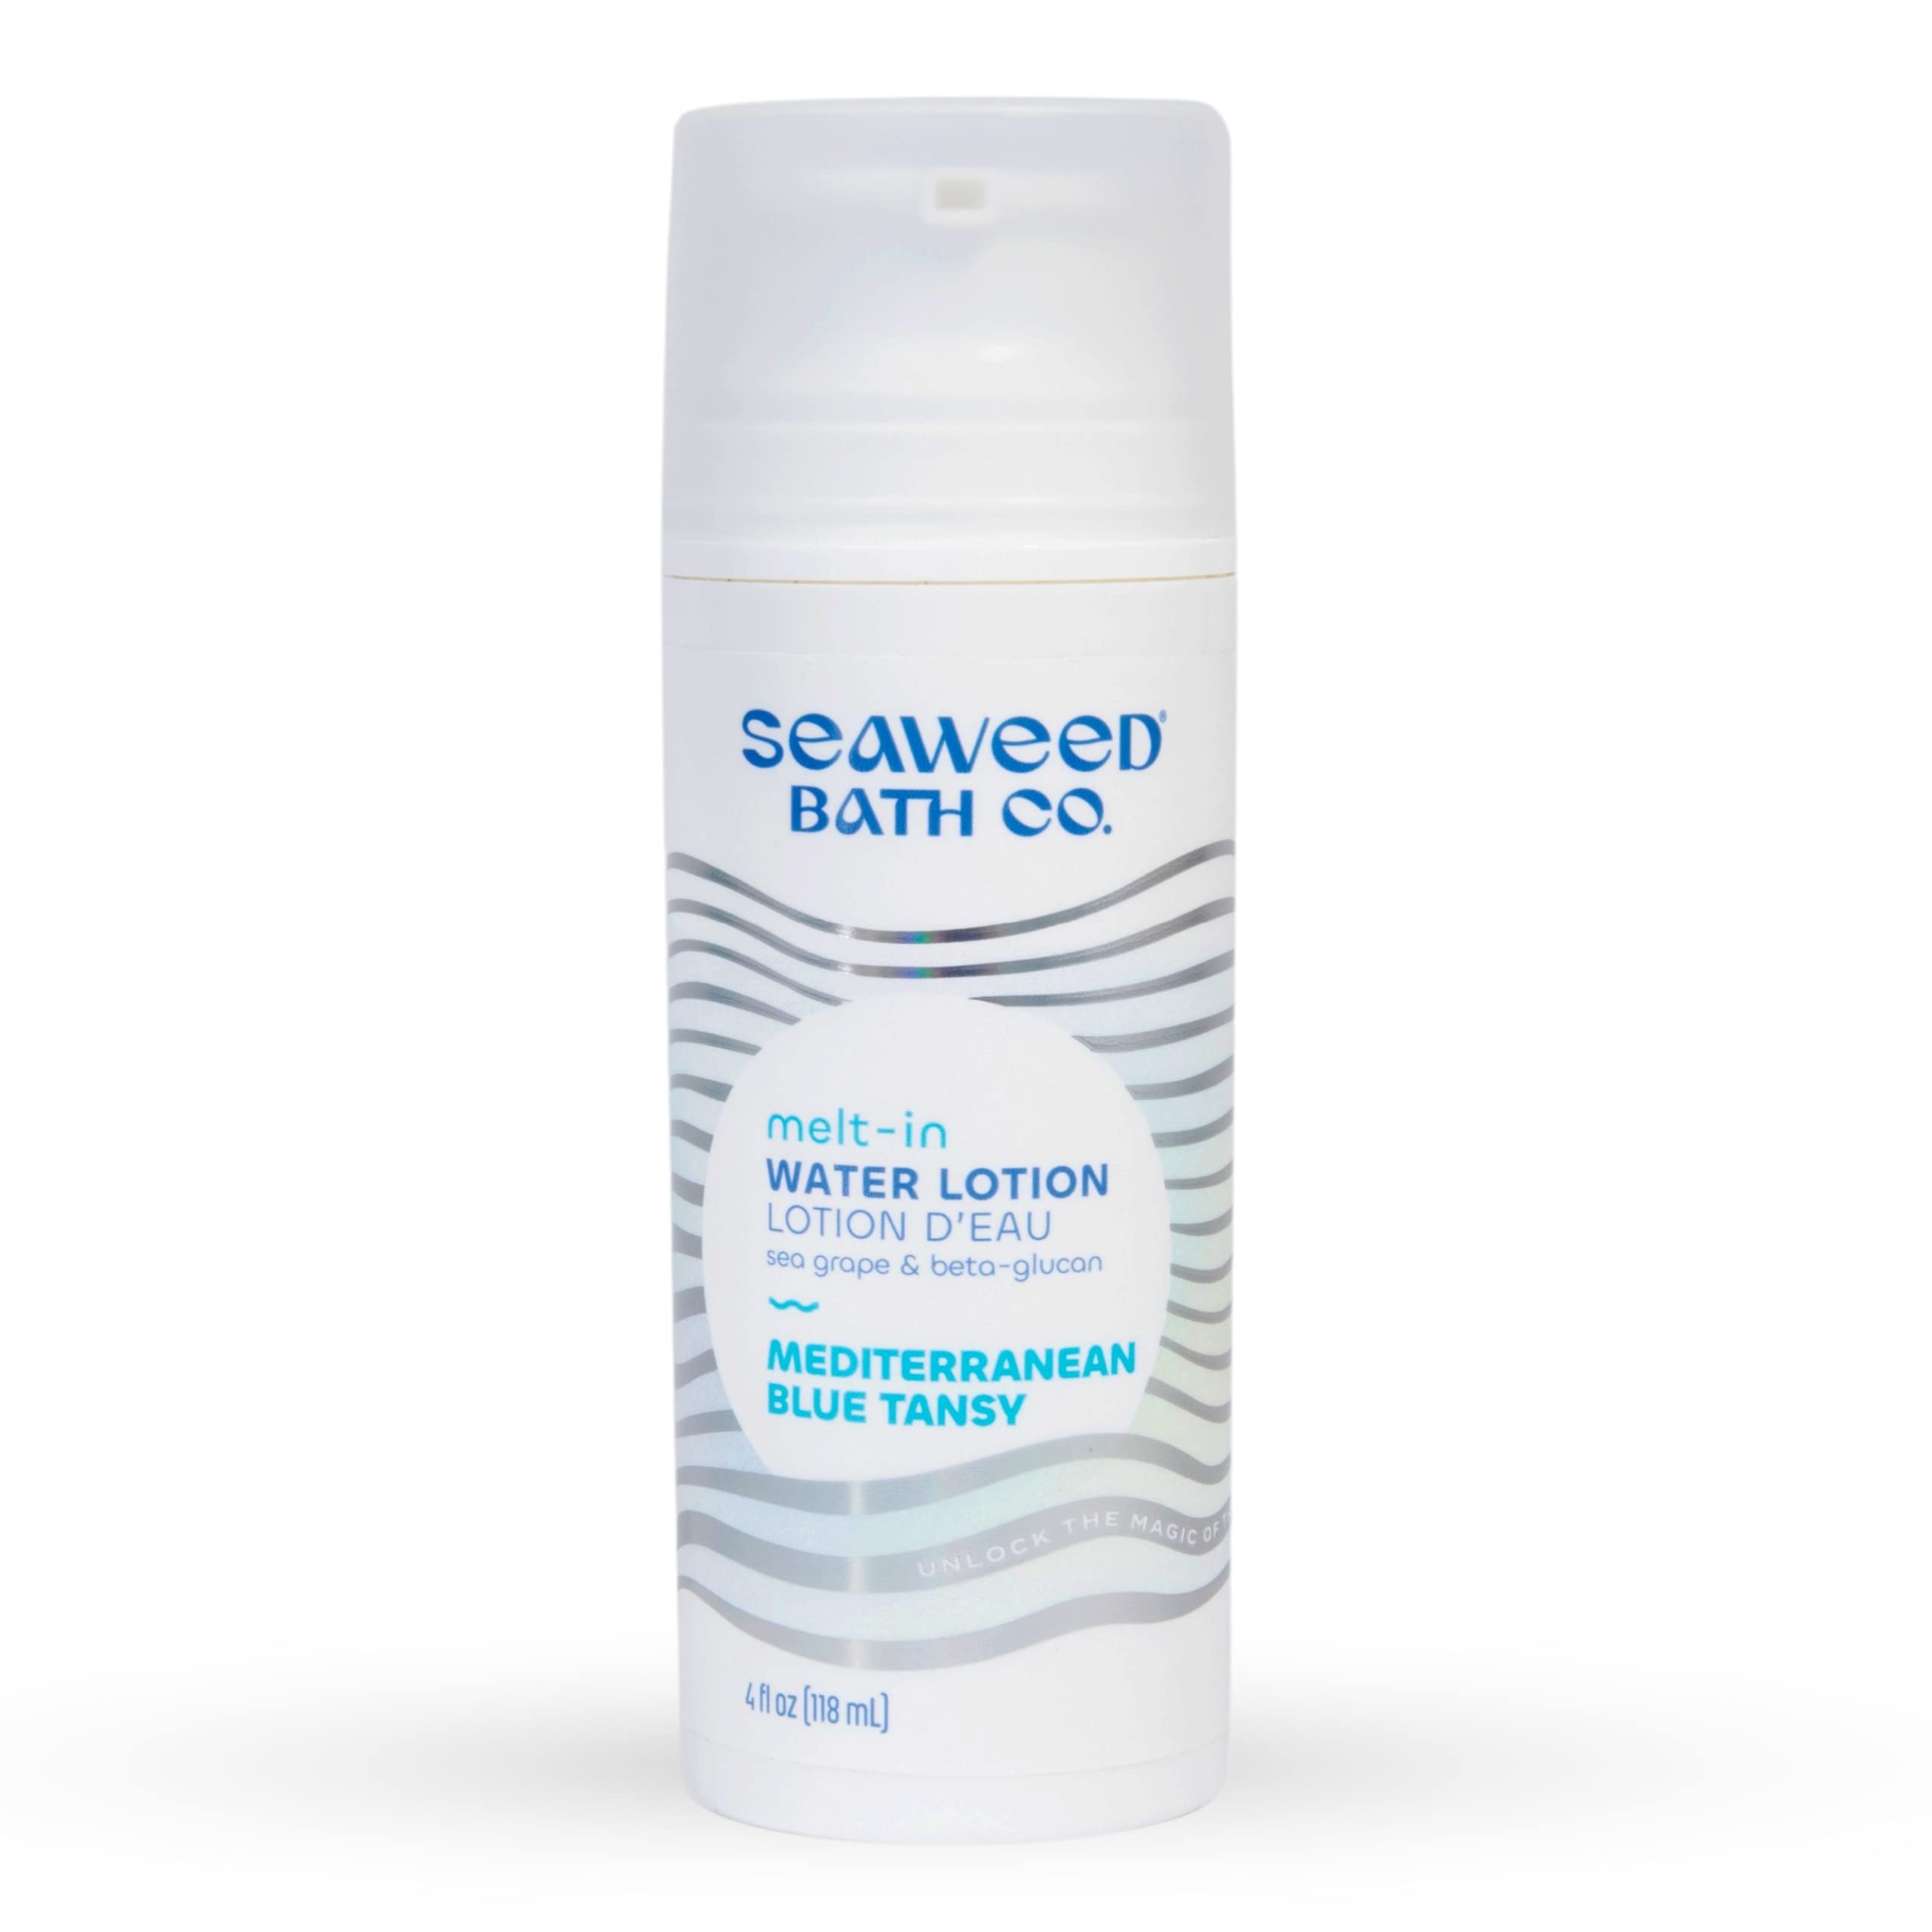 Seaweed Bath - Melt-in Water Lotion Mediterranean Blue Tansy Scent, 4 fl oz - Sustainably Harvested Seaweed, Sea Grape and Beta-Glucan - Nourishes, Hydrates, Support Skin Barrier Replenishes